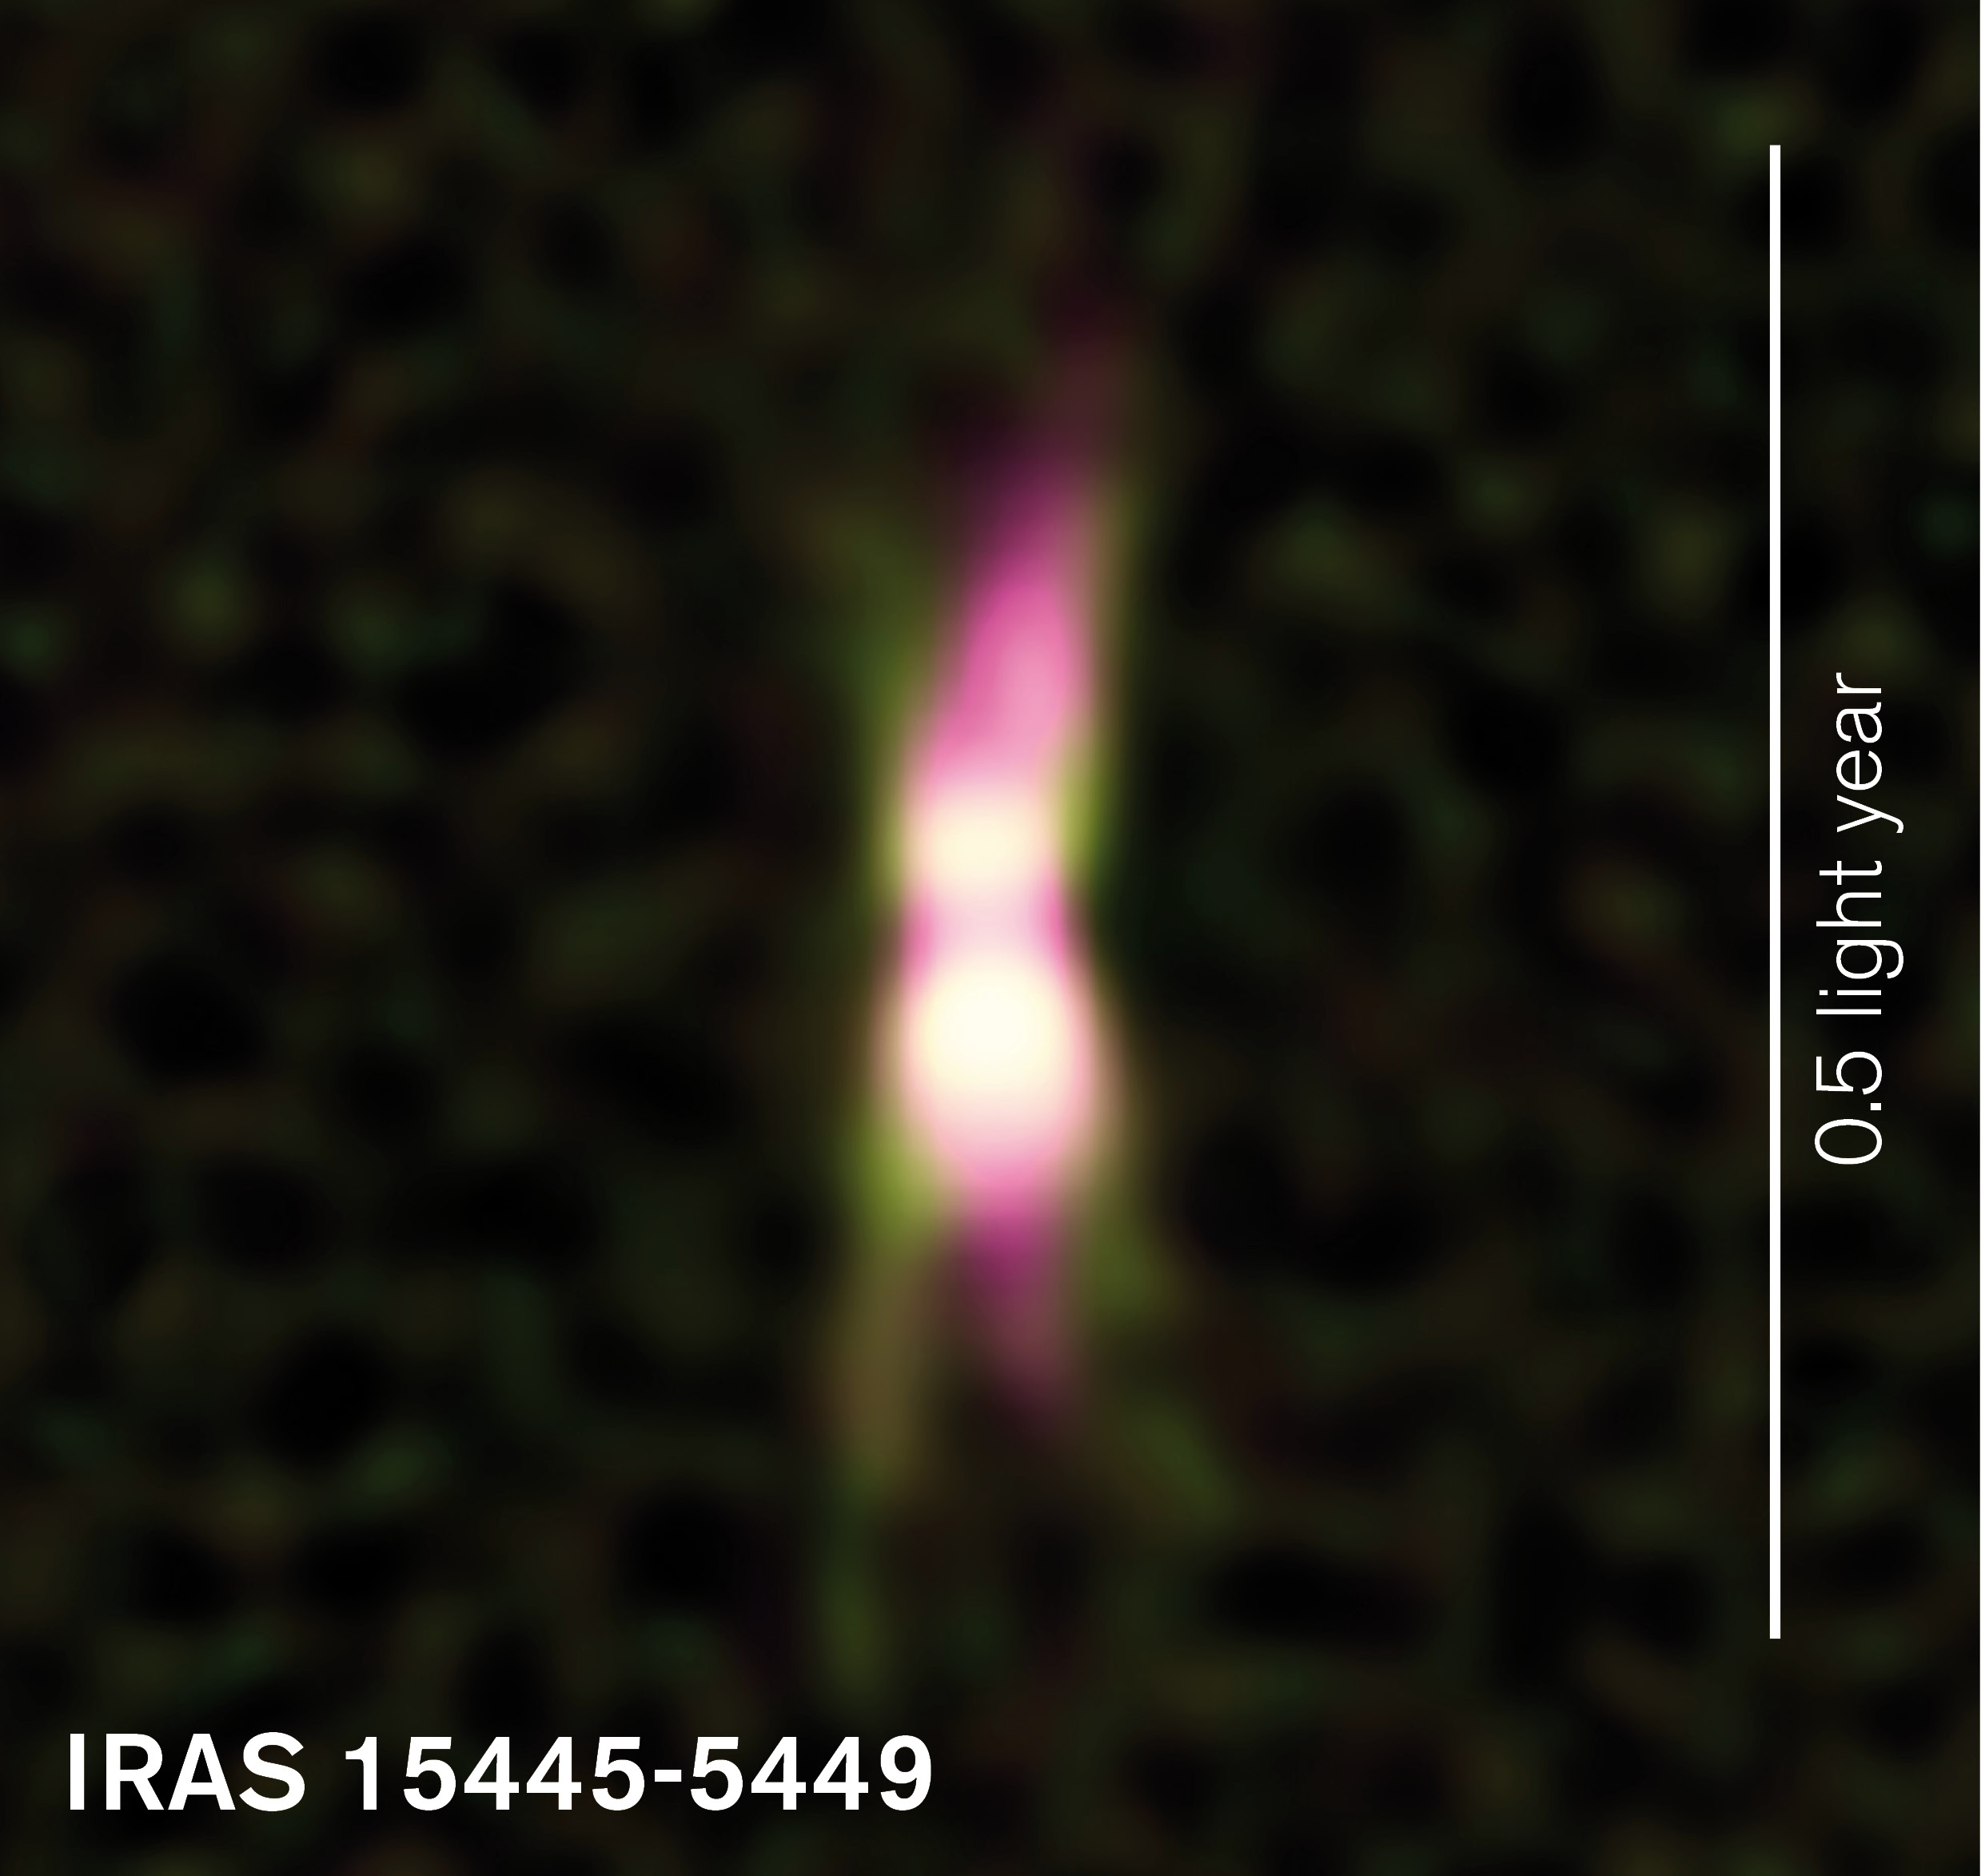 IRAS 15445-5449 Shows A Magnetic 'Bloom'